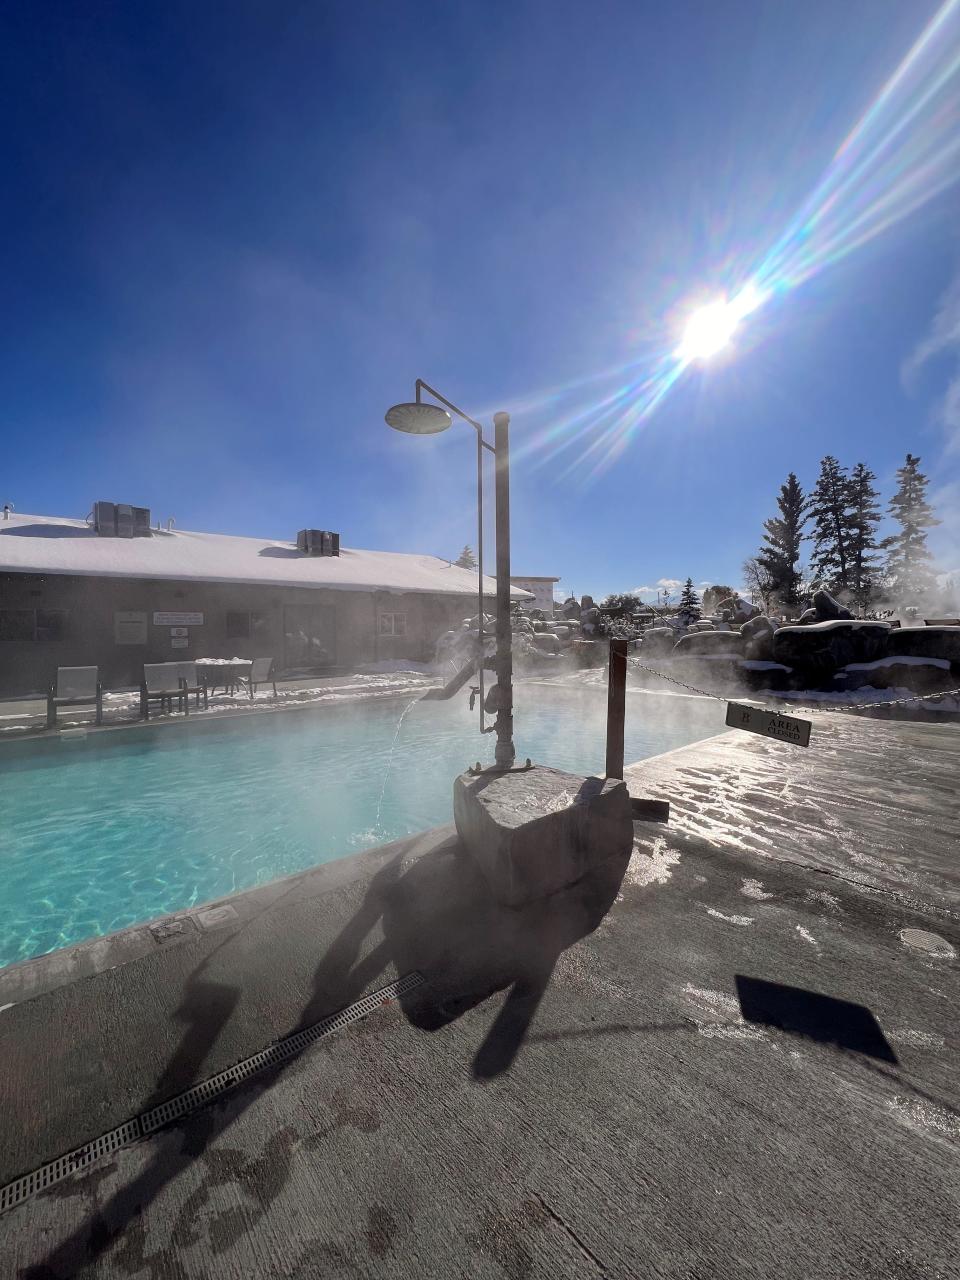 Bozeman Hot Springs has 12 different pools with varying temperatures.